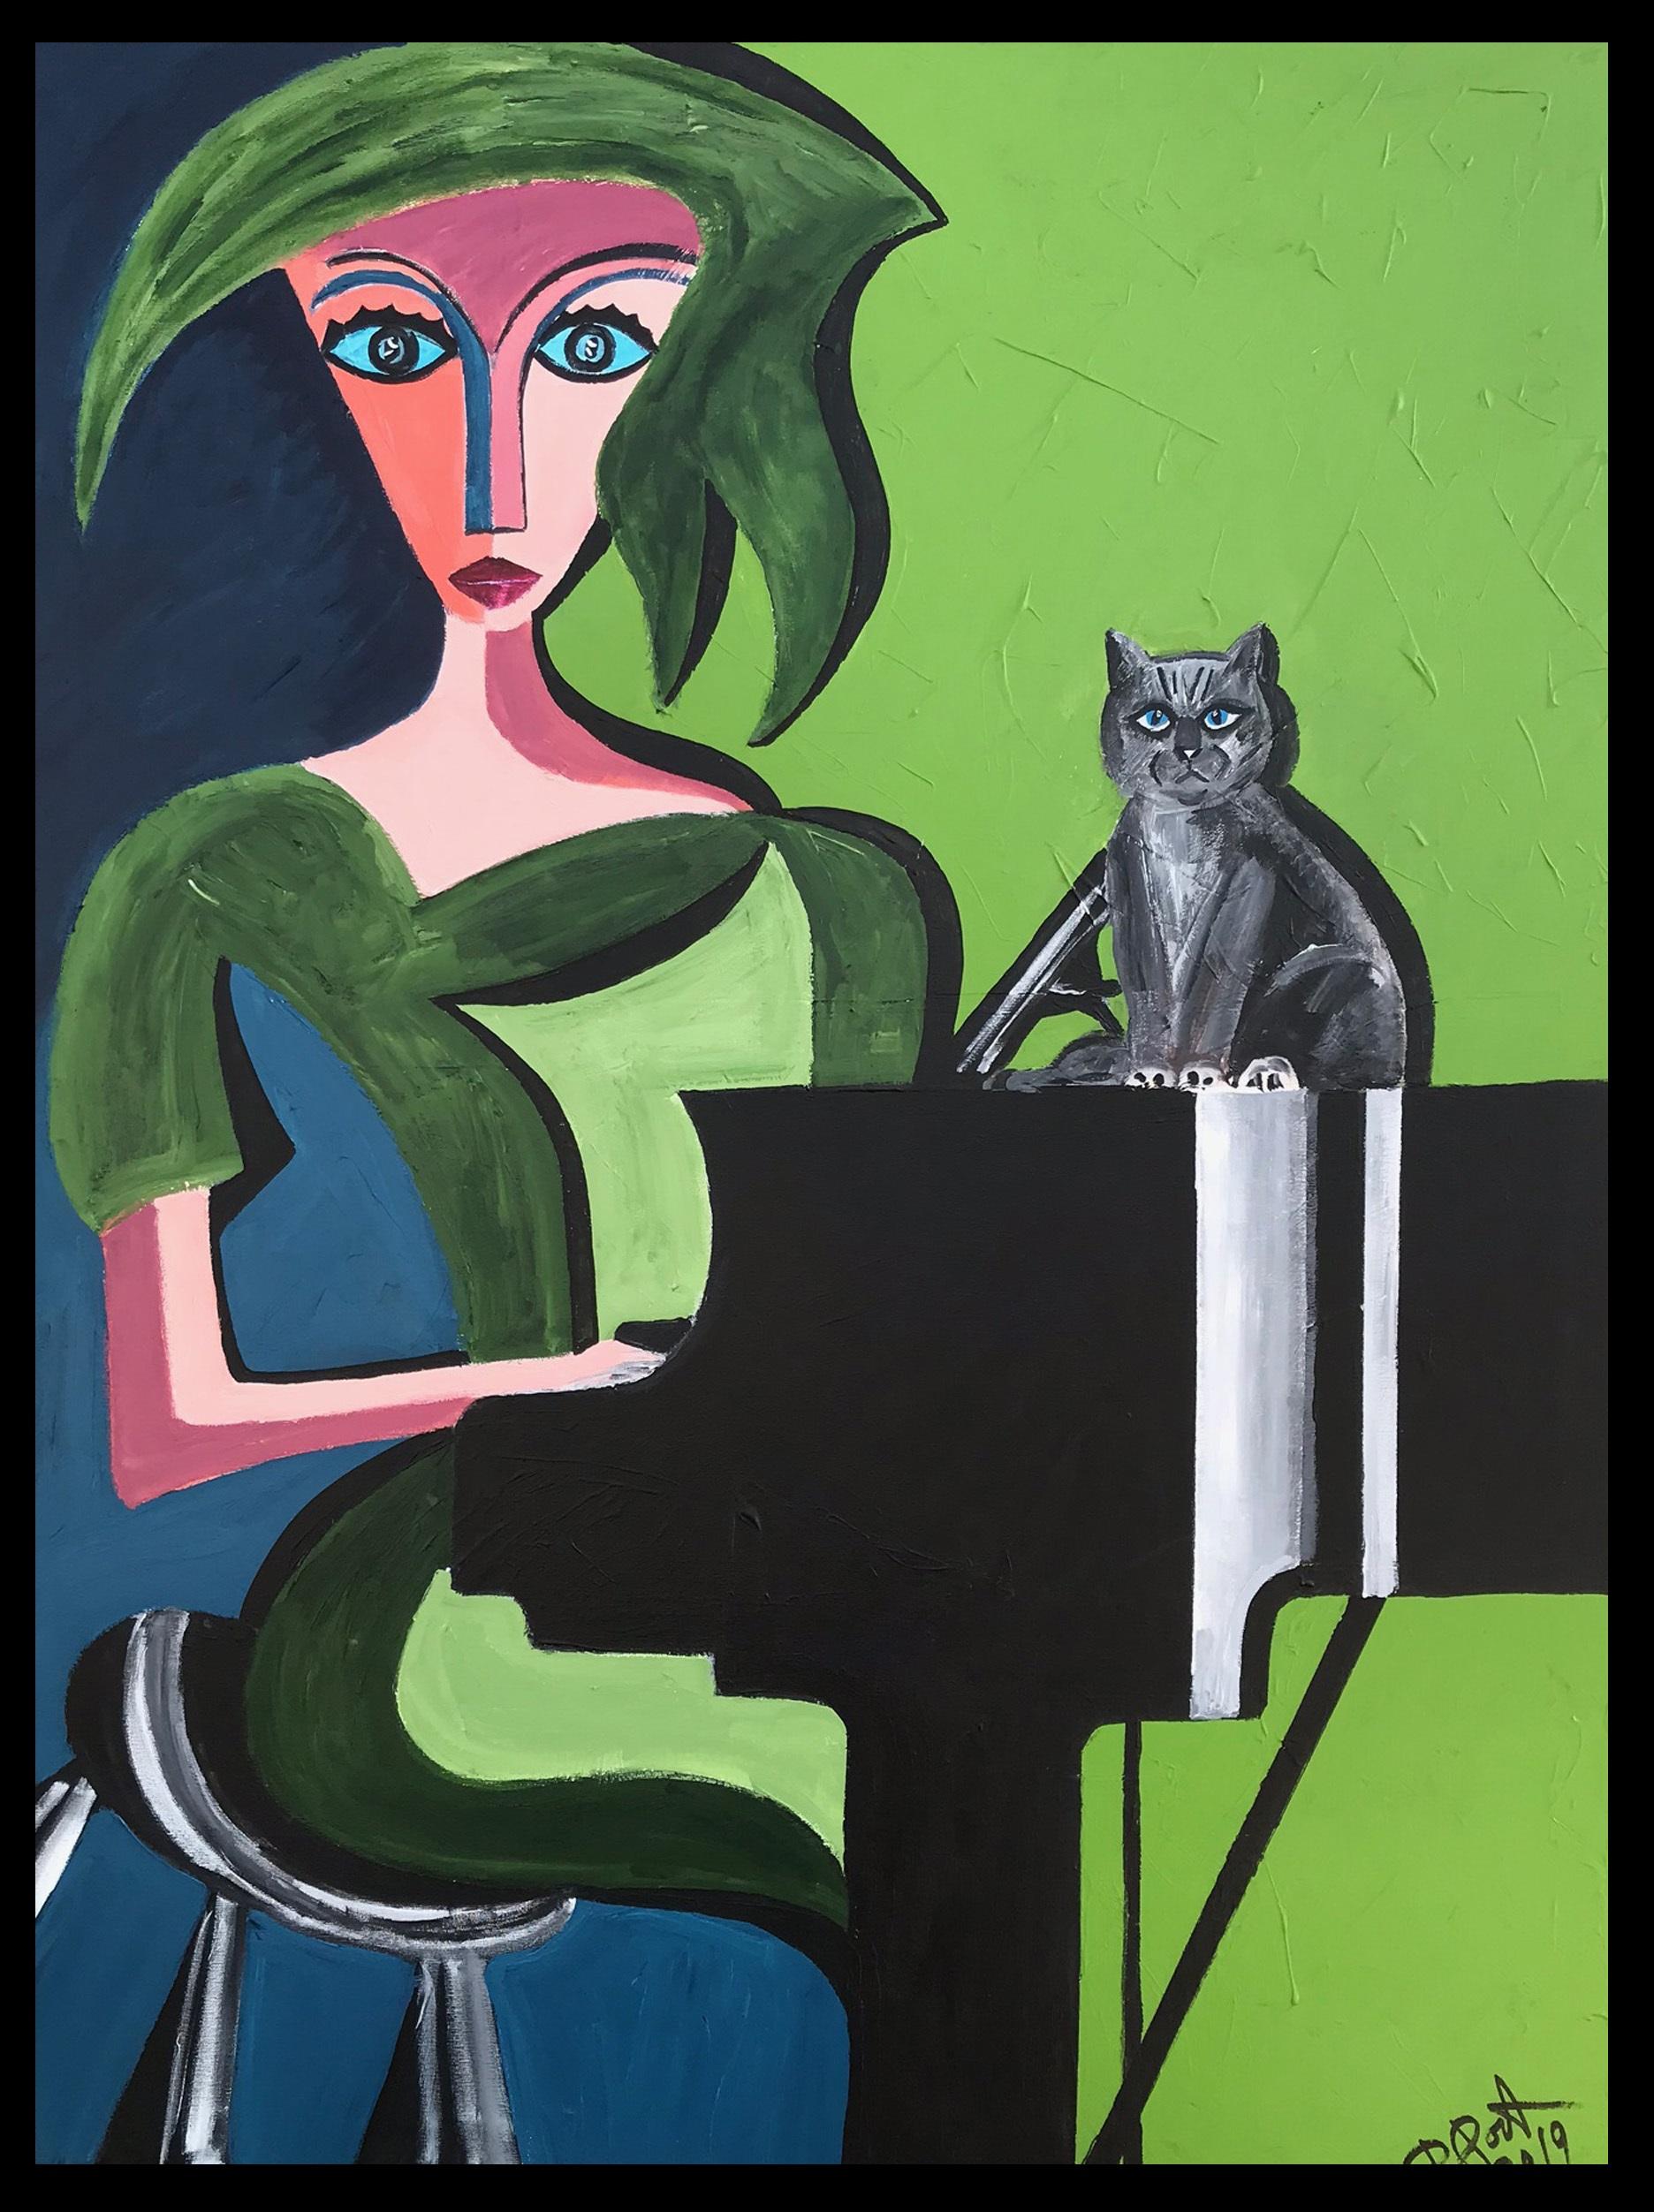 23.-Woman over green 100 x 130 cm acrylic painting

Born in Badalona (Barcelona).
Photographer and advertising film director.
Founding partner of the advertising production company La Cosa de las Peliculas: 
He has directed commercials for the best